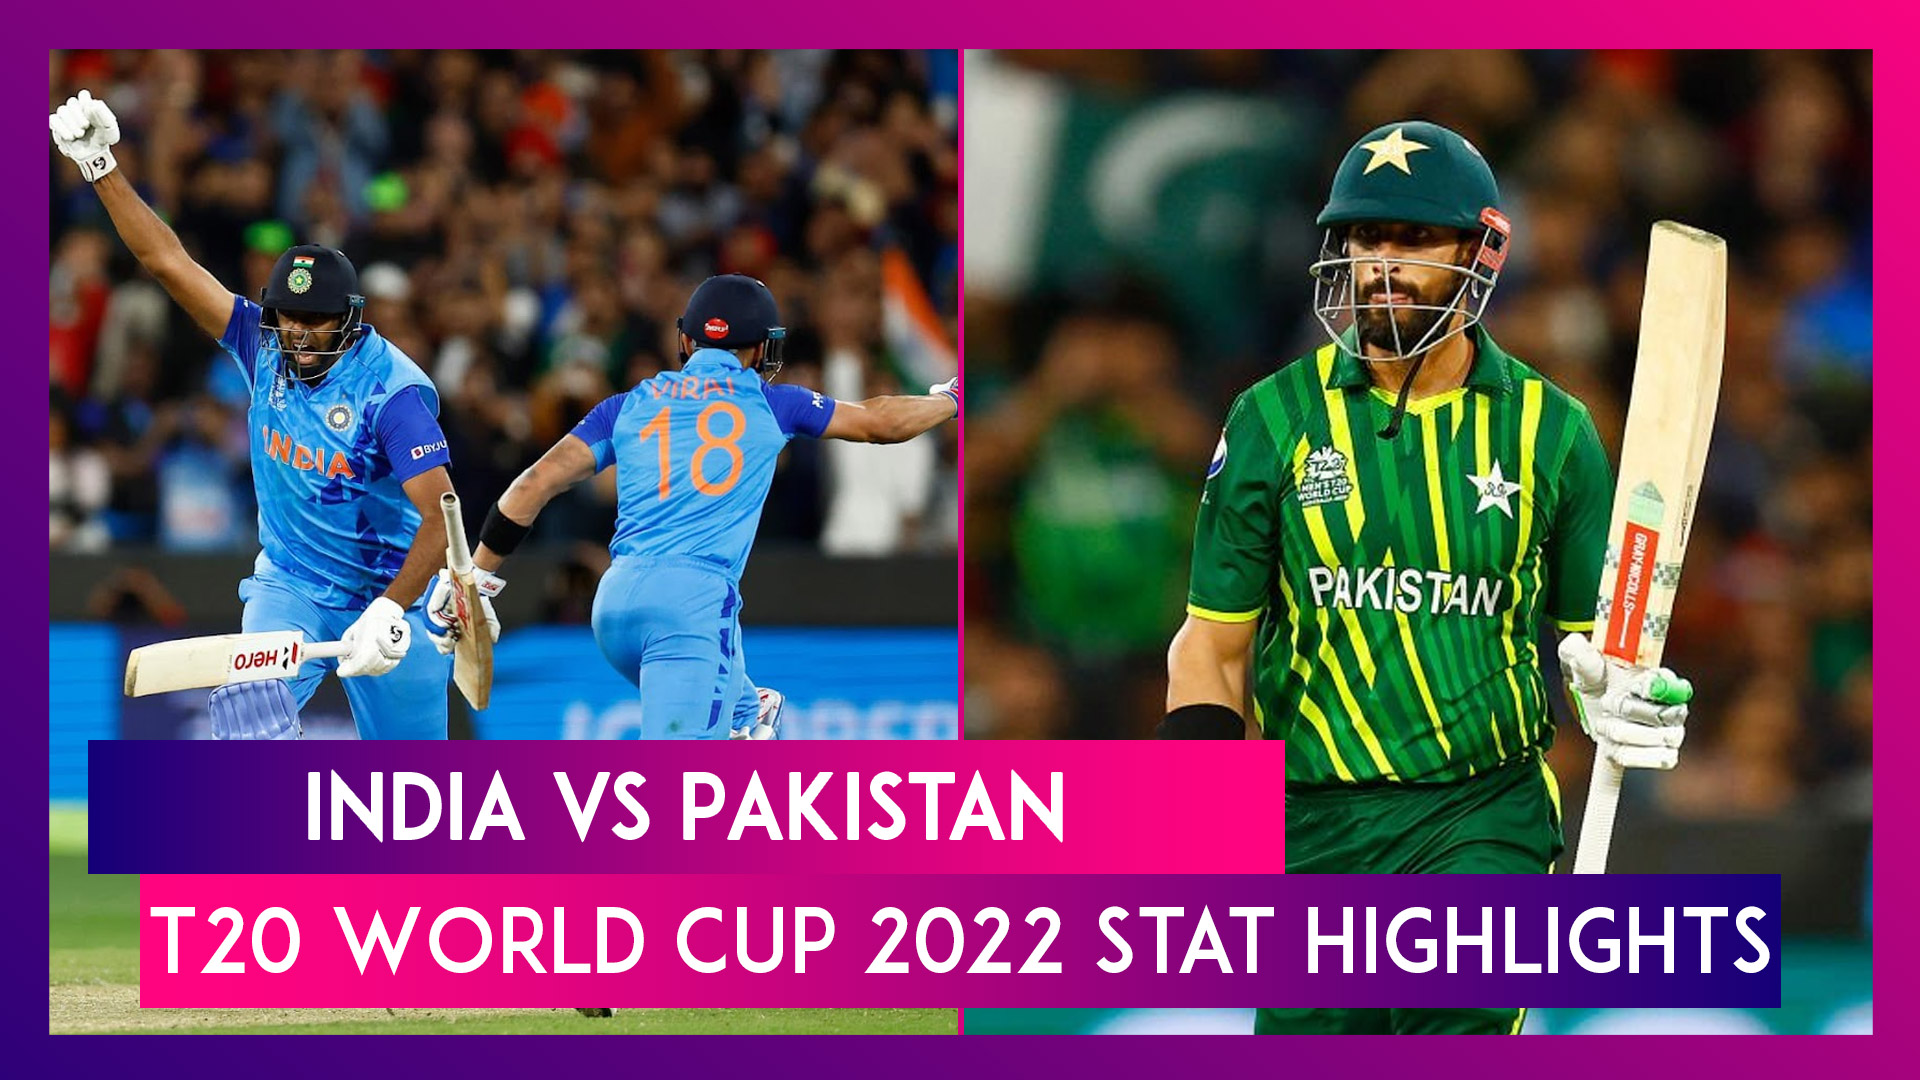 IND vs PAK T20 World Cup 2022 Stat Highlights Virat Kohli Shines in Thrilling Win 📹 Watch Videos From LatestLY